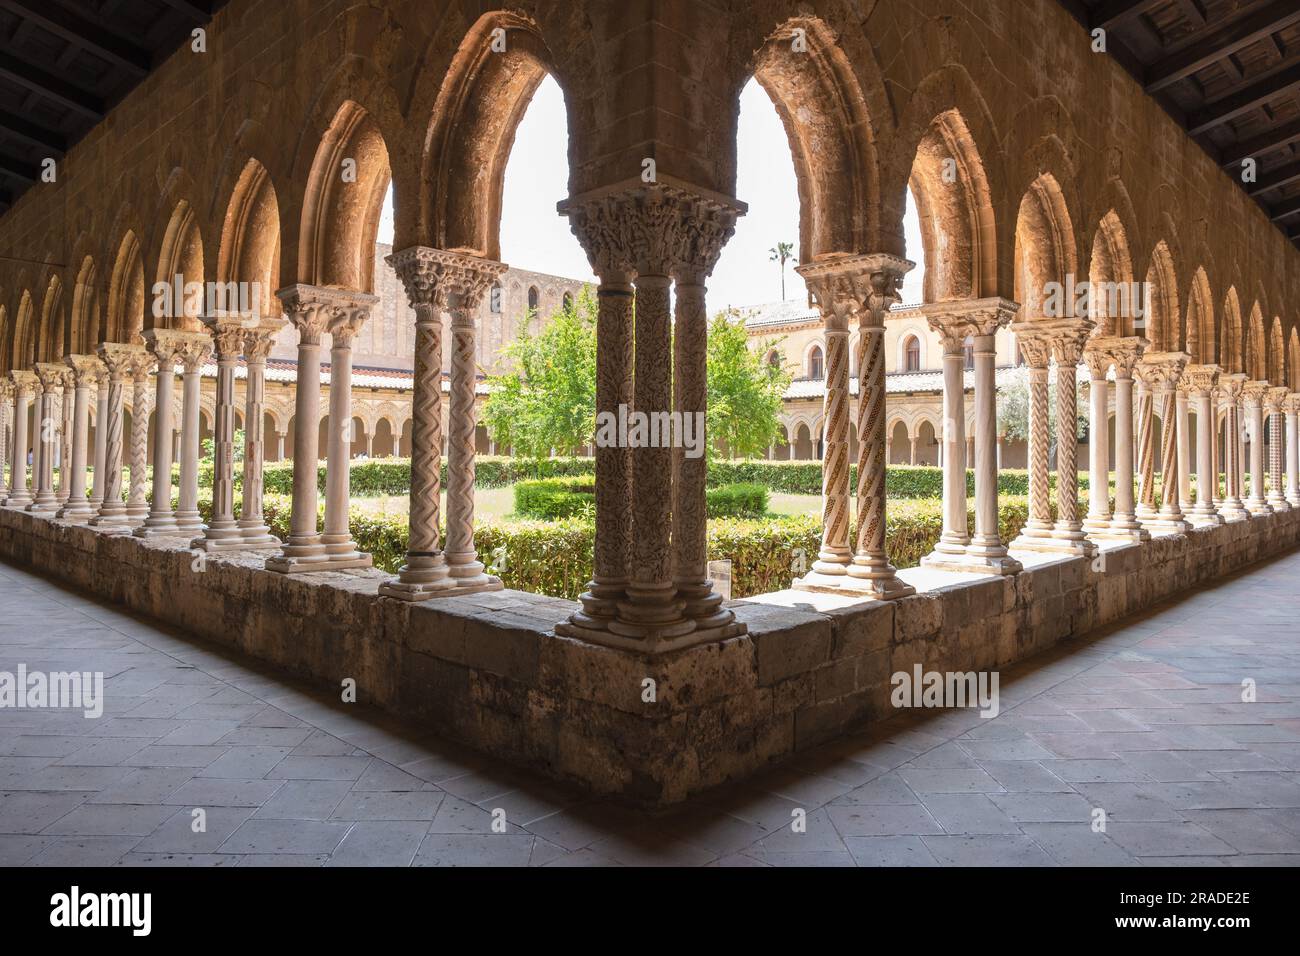 Cloister of Monreale cathedral, Sicily, Italy Stock Photo